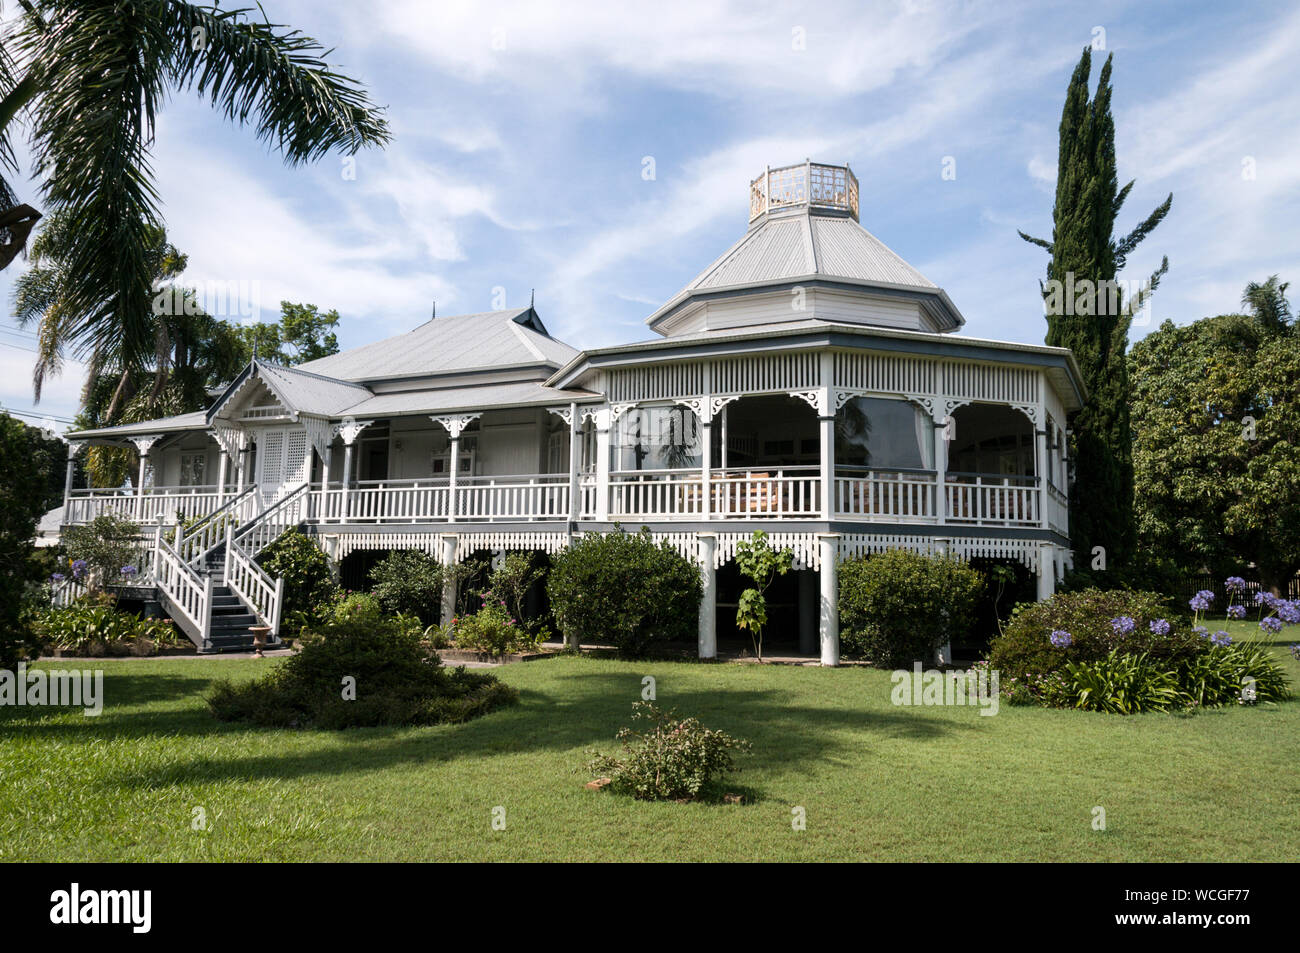 A Federation Queenslander House Designed And Built On Stilts Is An Icon Of Queensland In The Upmarket Suburbs Of Maryborough In Queensland Australi WCGF77 